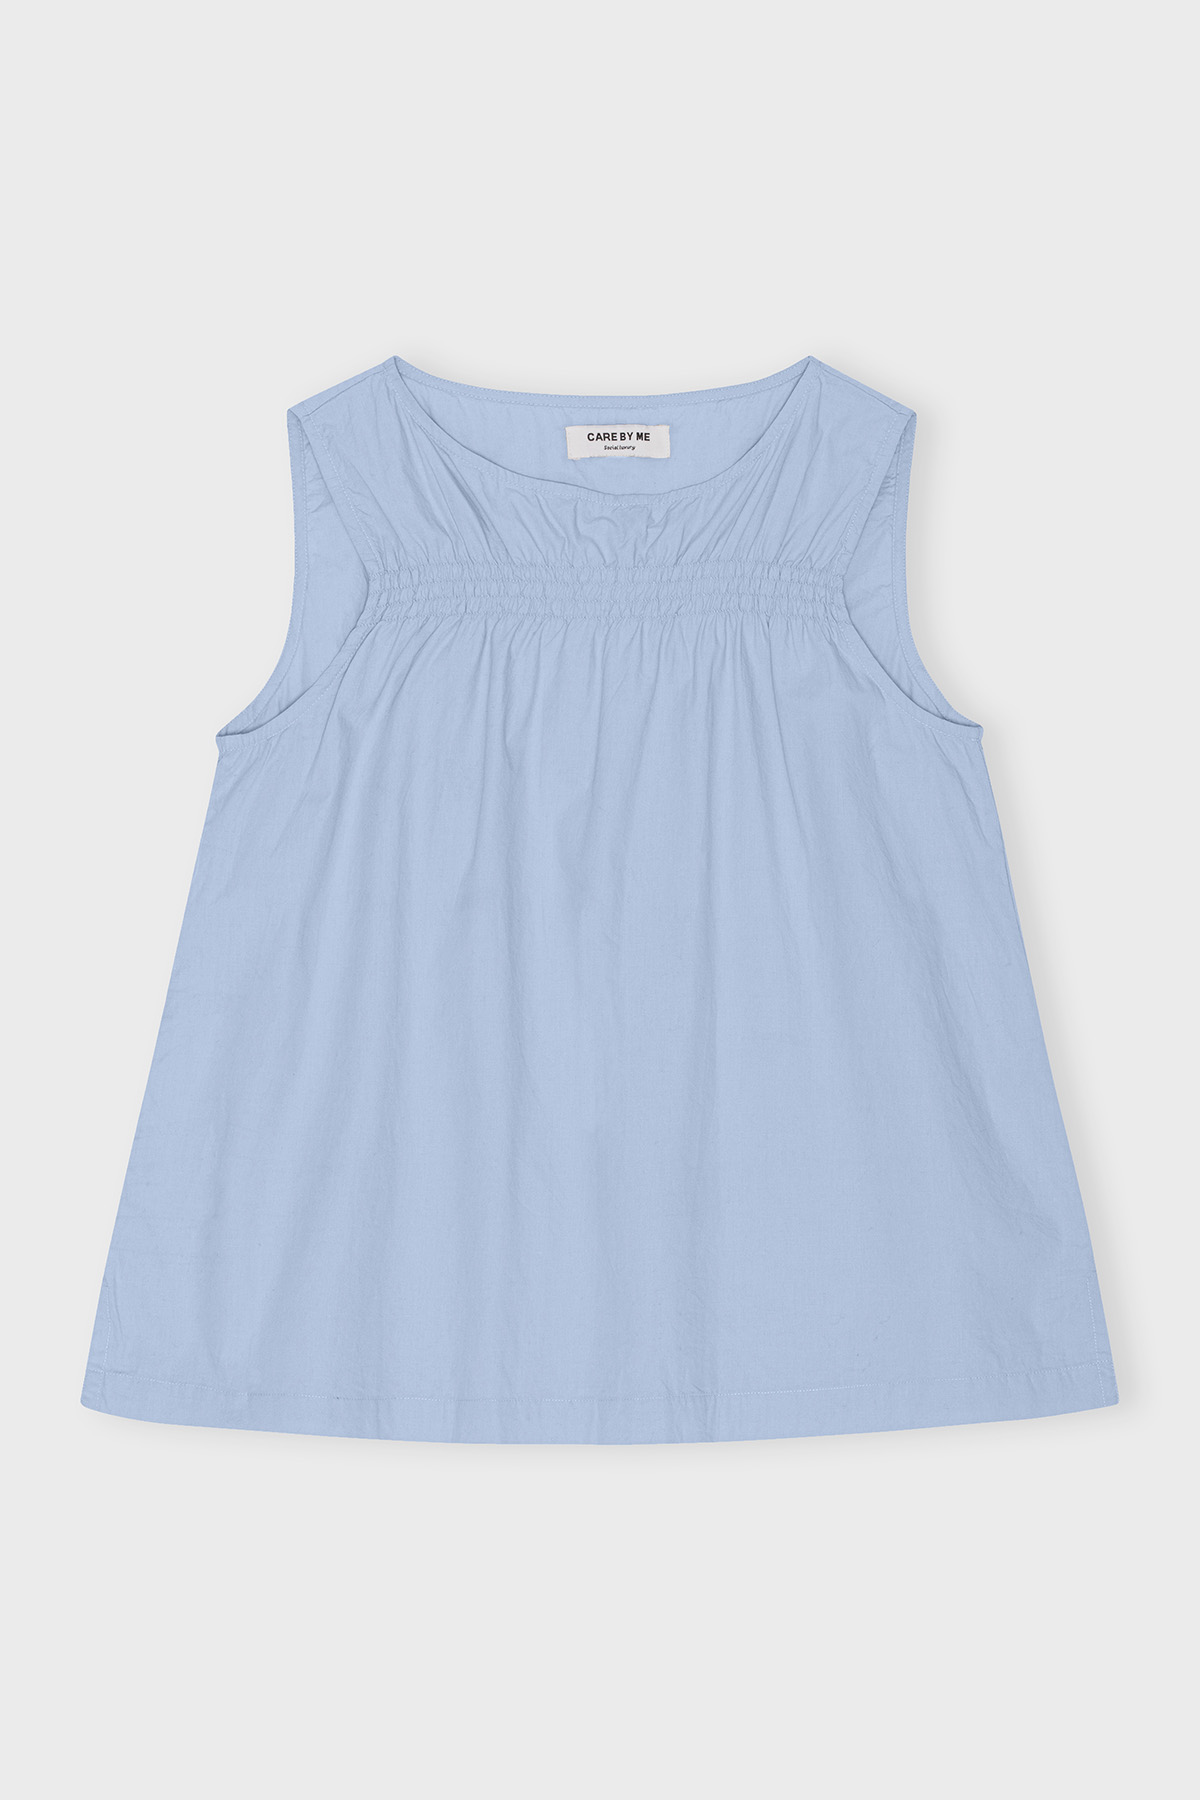 Top “Laura Bell” fra Care By Me – Summer Blue